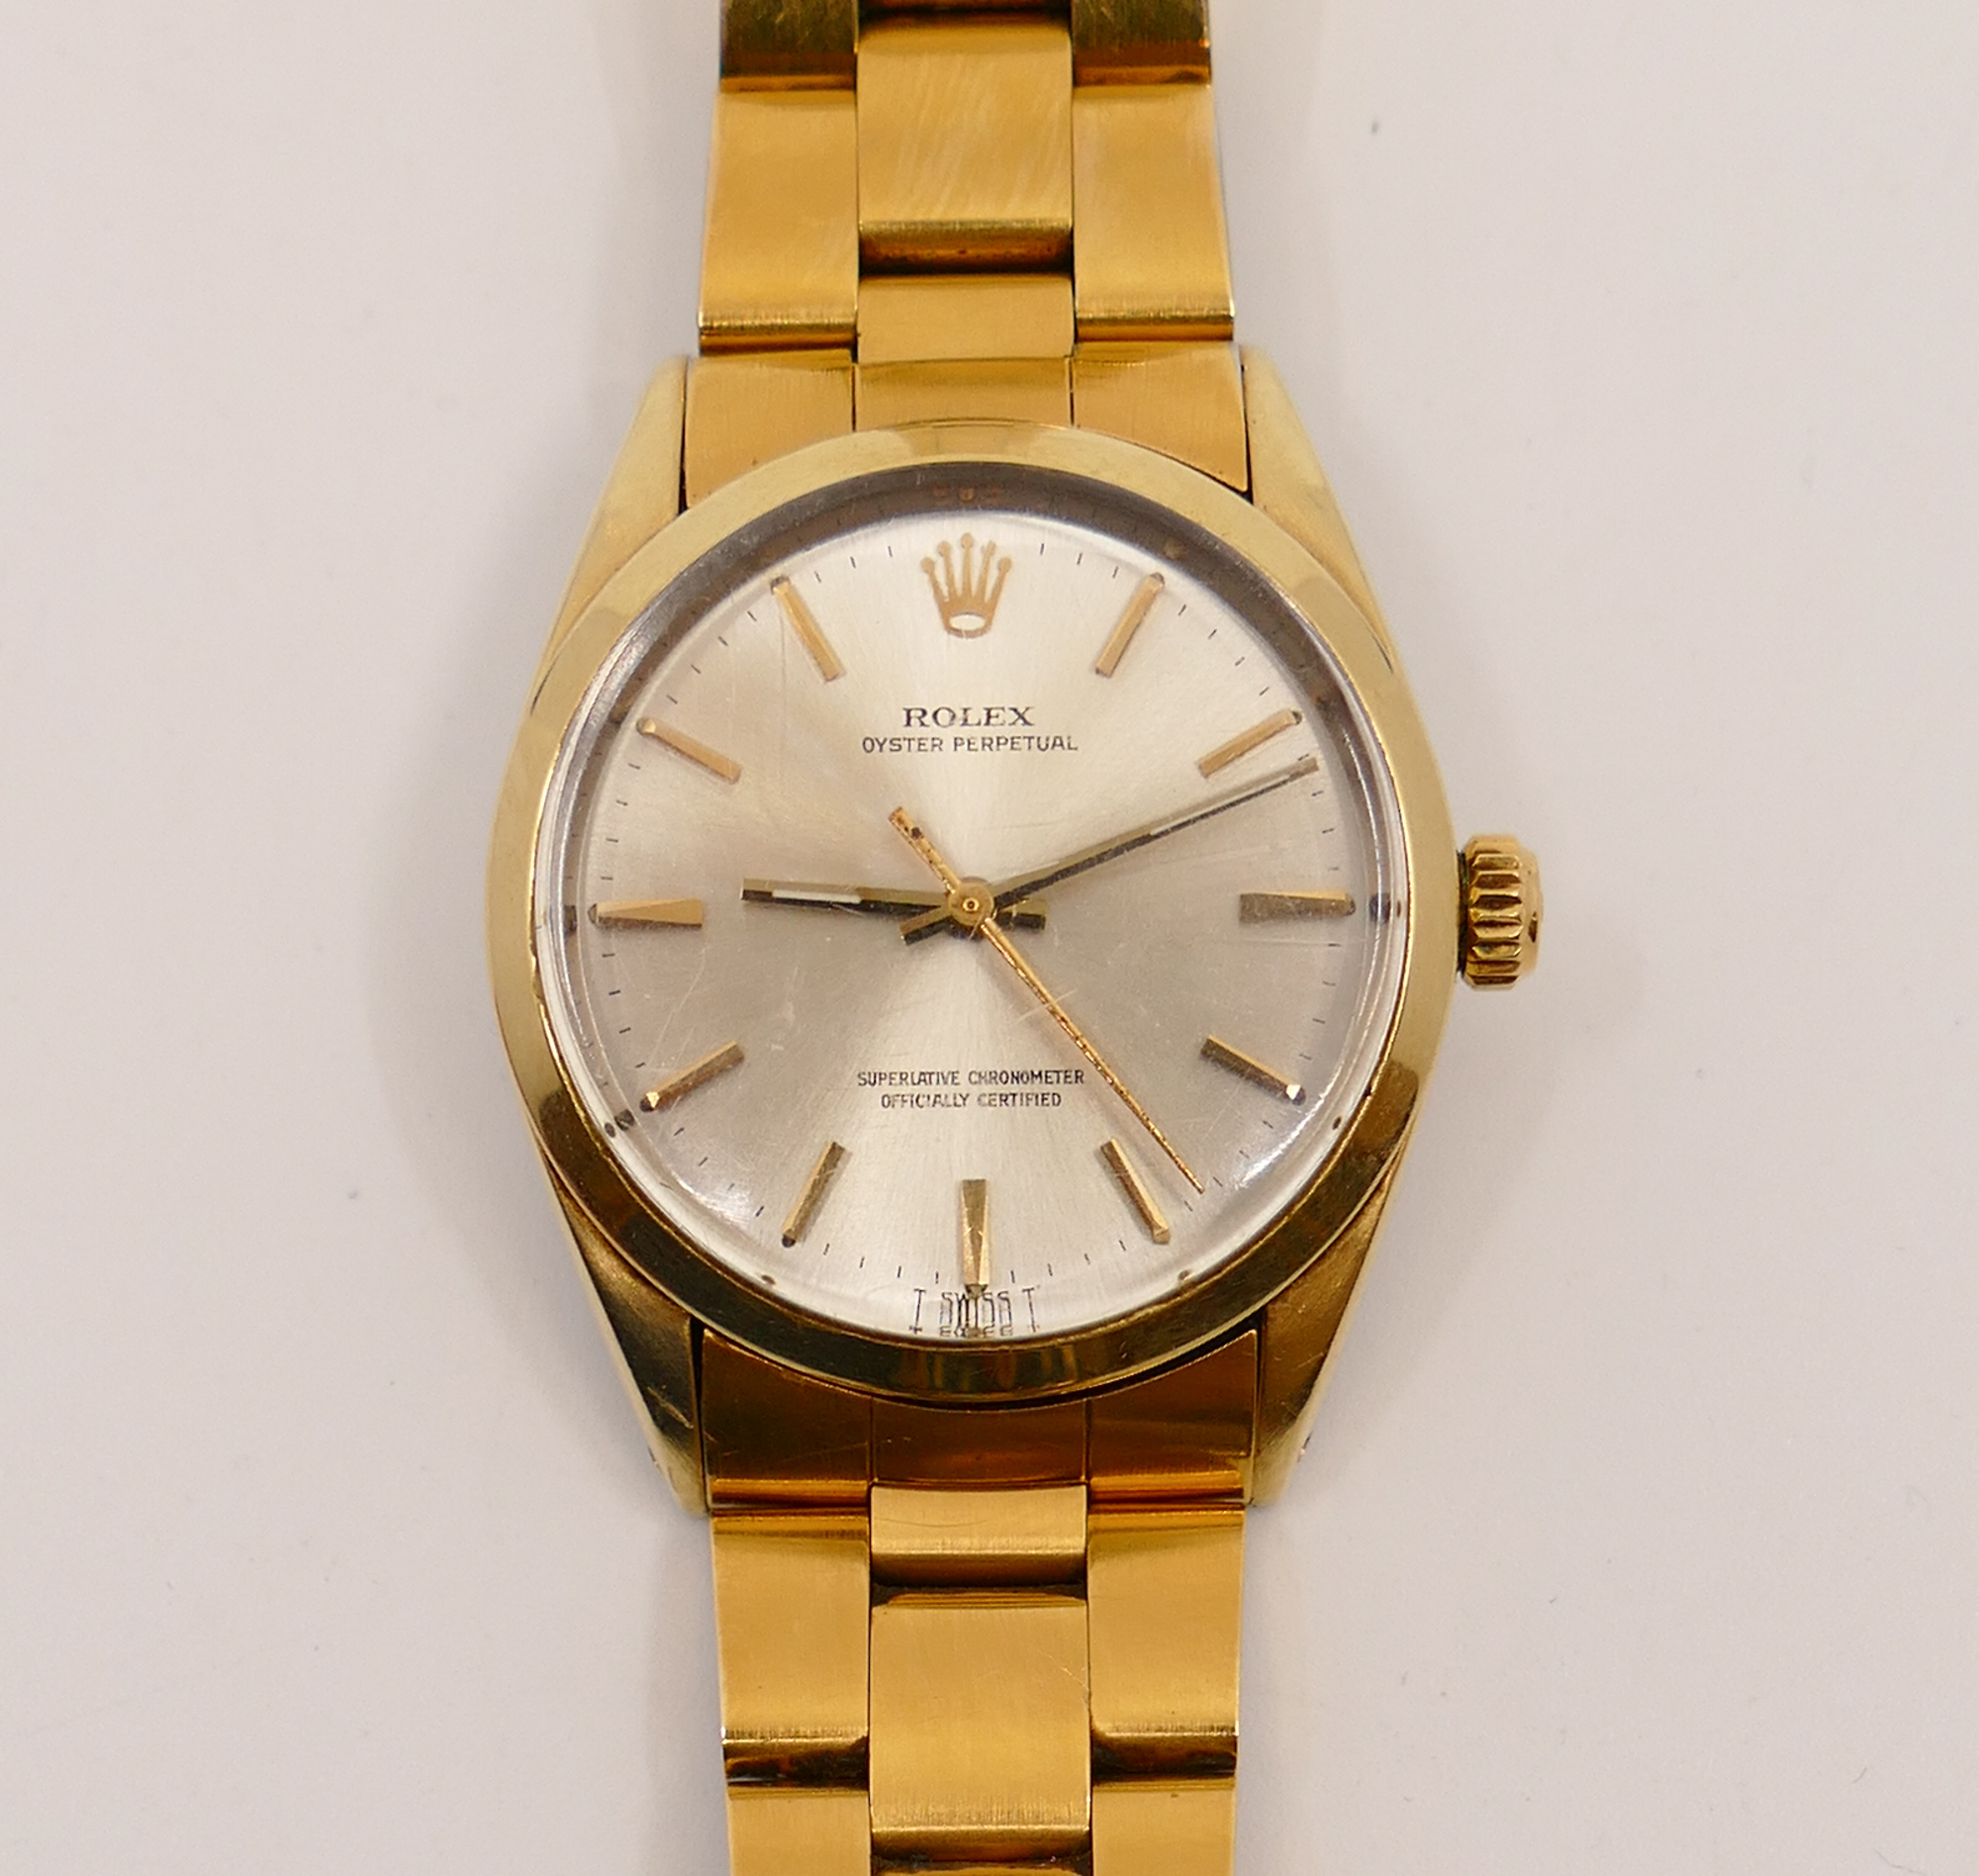 Rolex Oyster Perpetual Ref. 1024